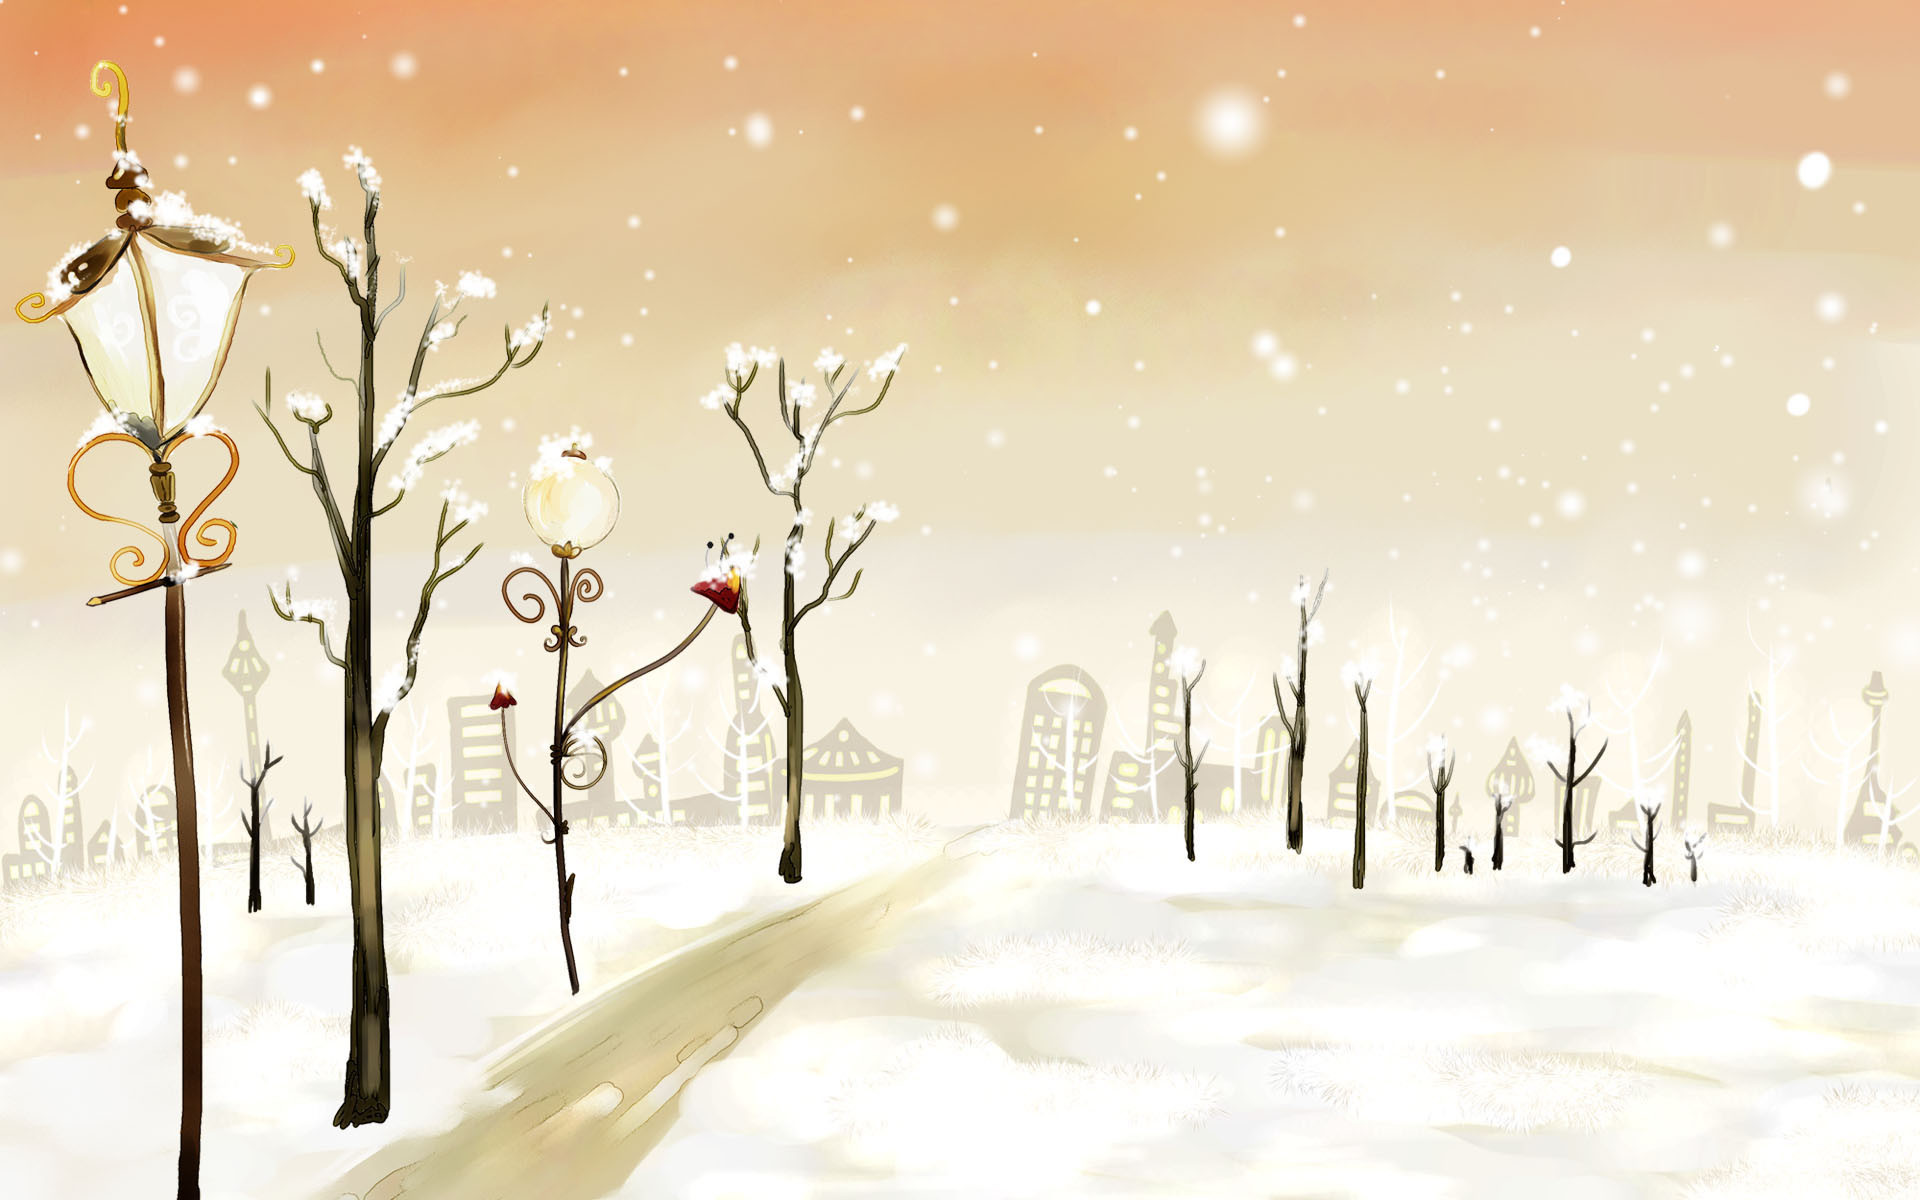 1920x1200 Winter Fairyland Wallpaper For 24-Inch Widescreen LCD Monitor - 1920*1200  NO.